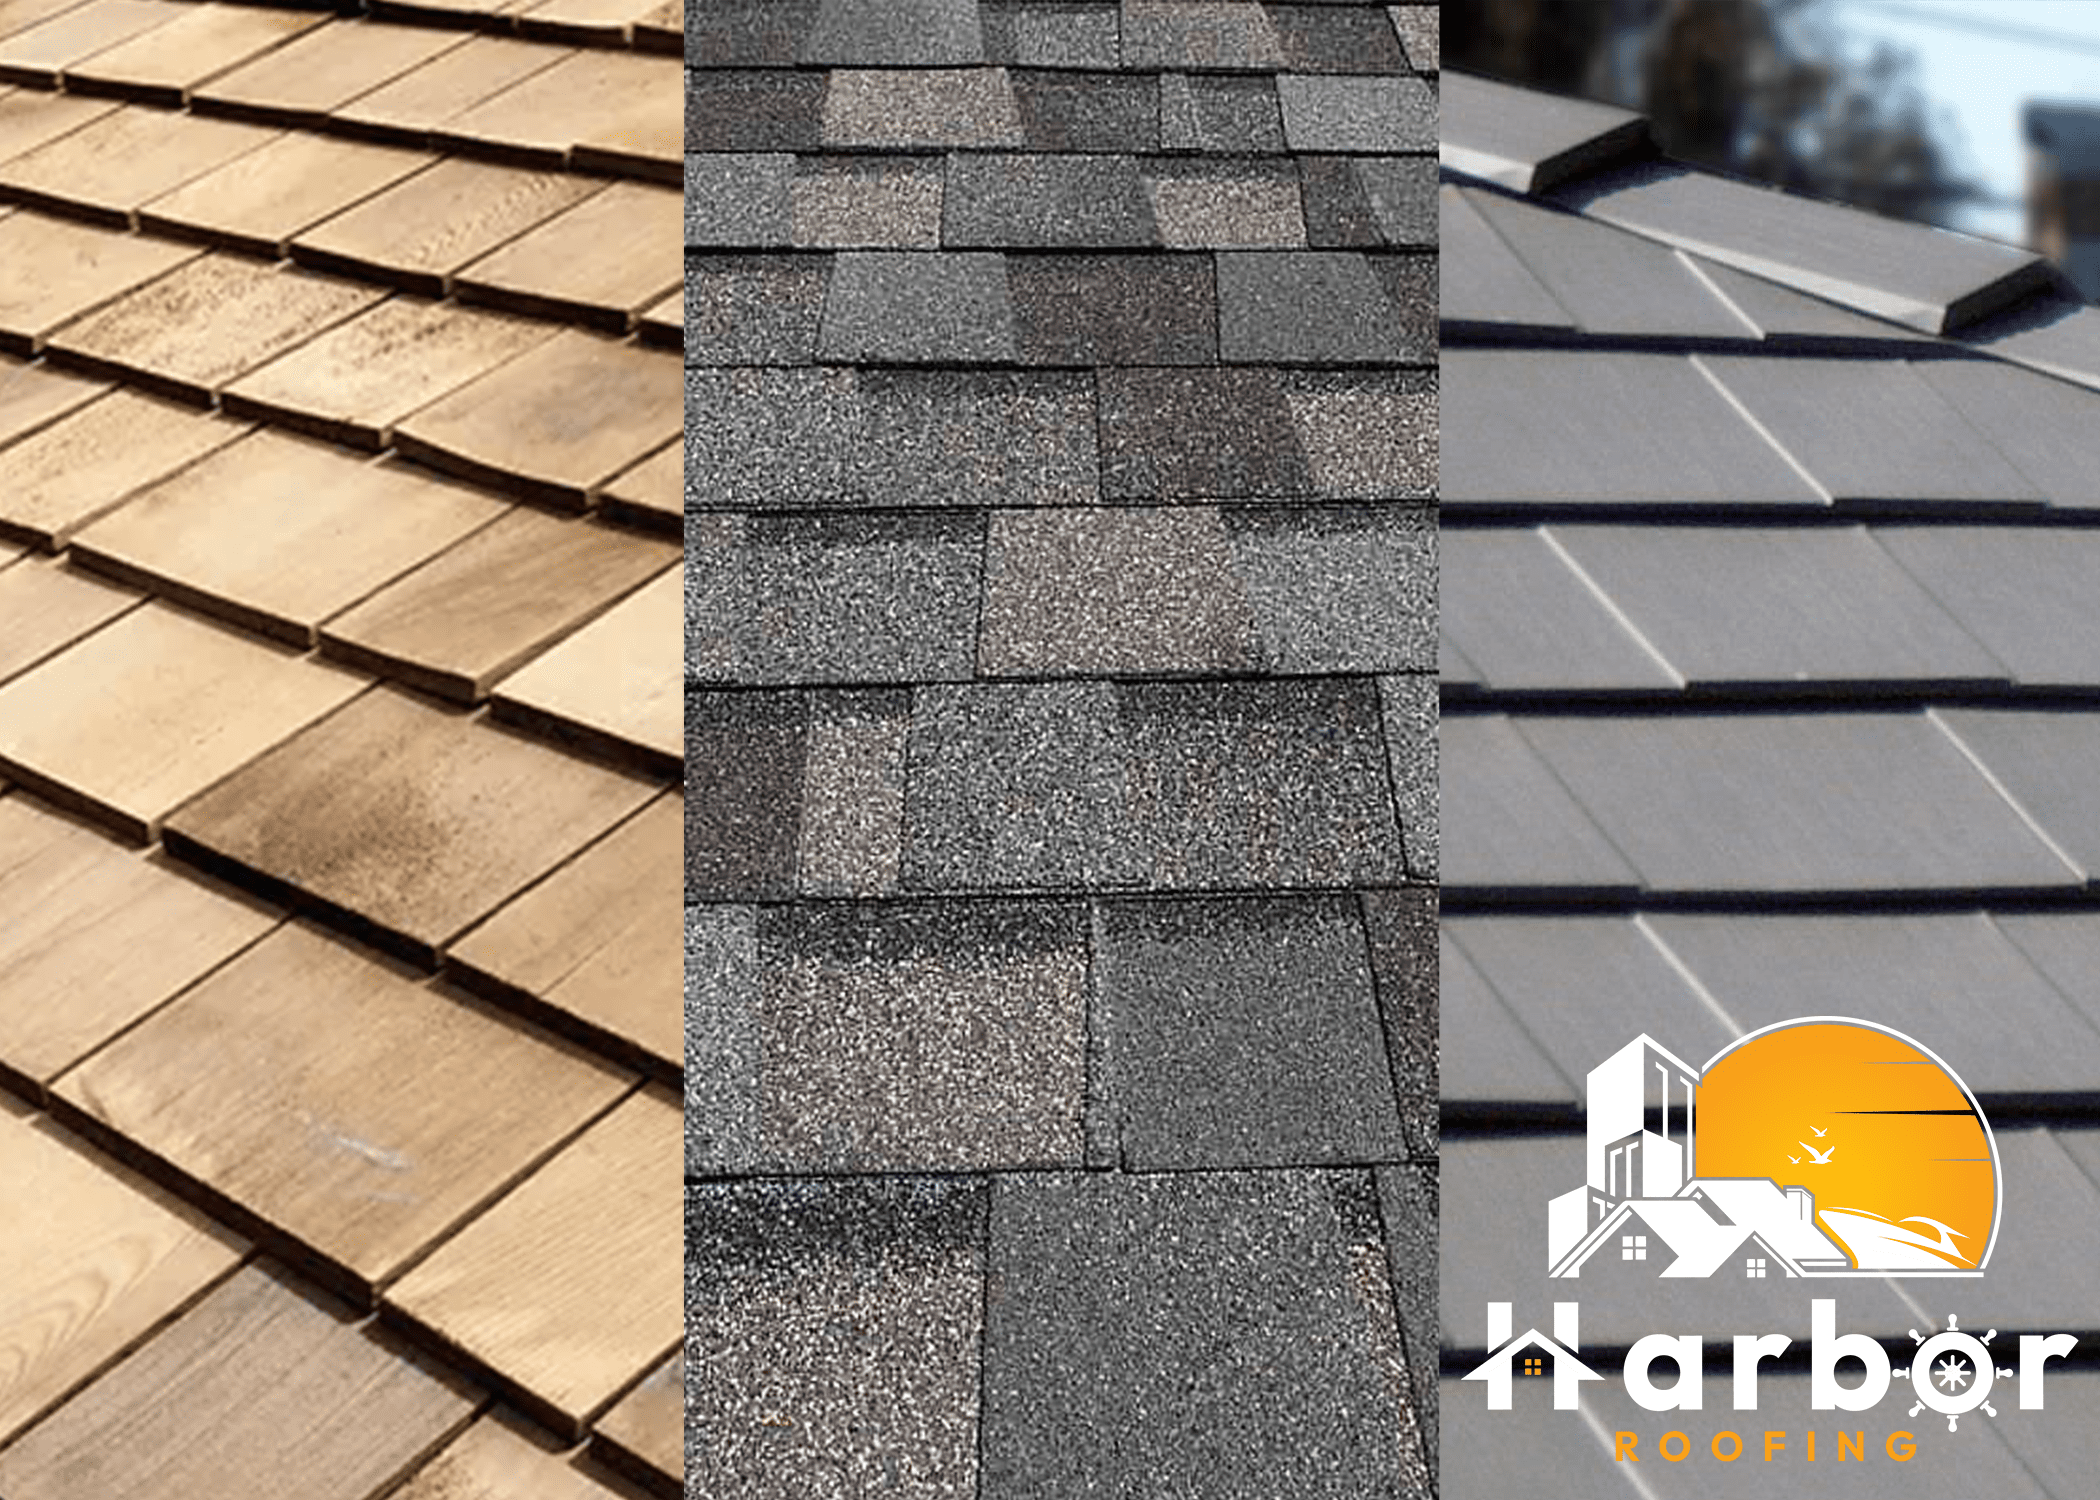 Different Types of Roof Shingles